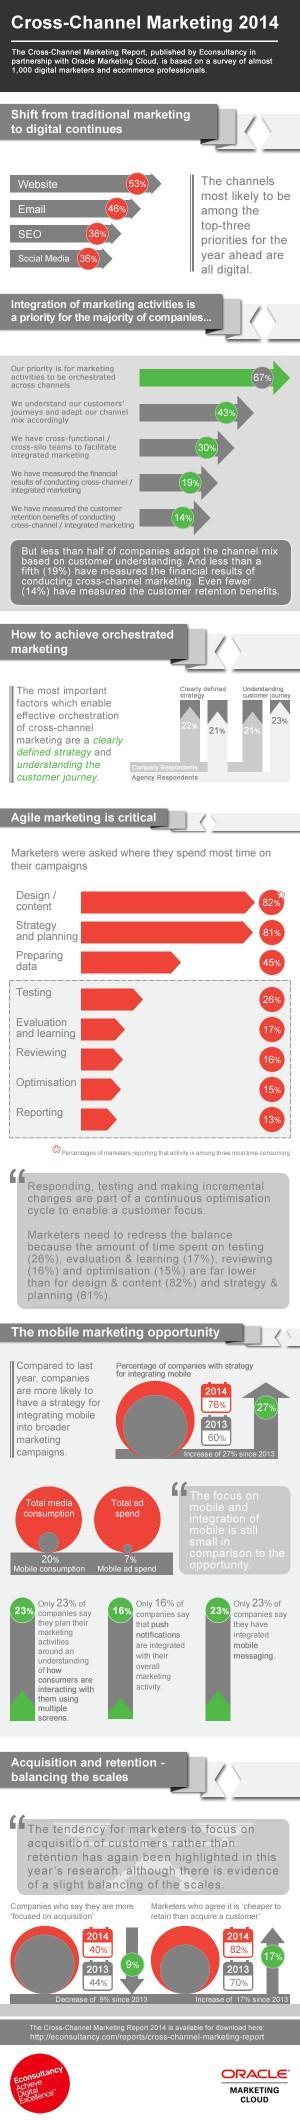 marketing-digital-cross-canal-2014-infographic-econsultancy